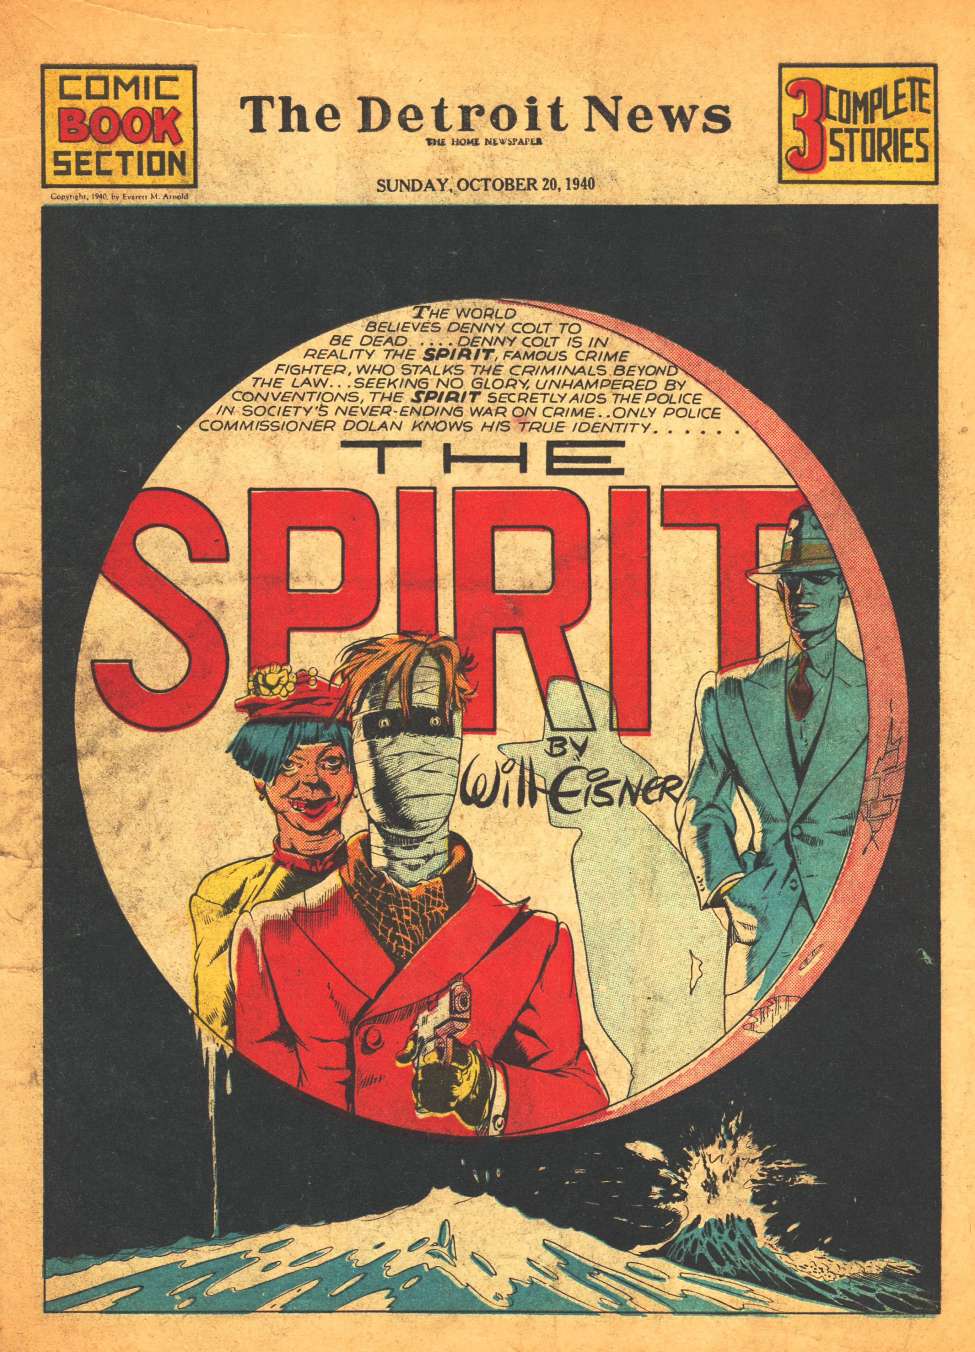 Comic Book Cover For The Spirit (1940-10-20) - Detroit News